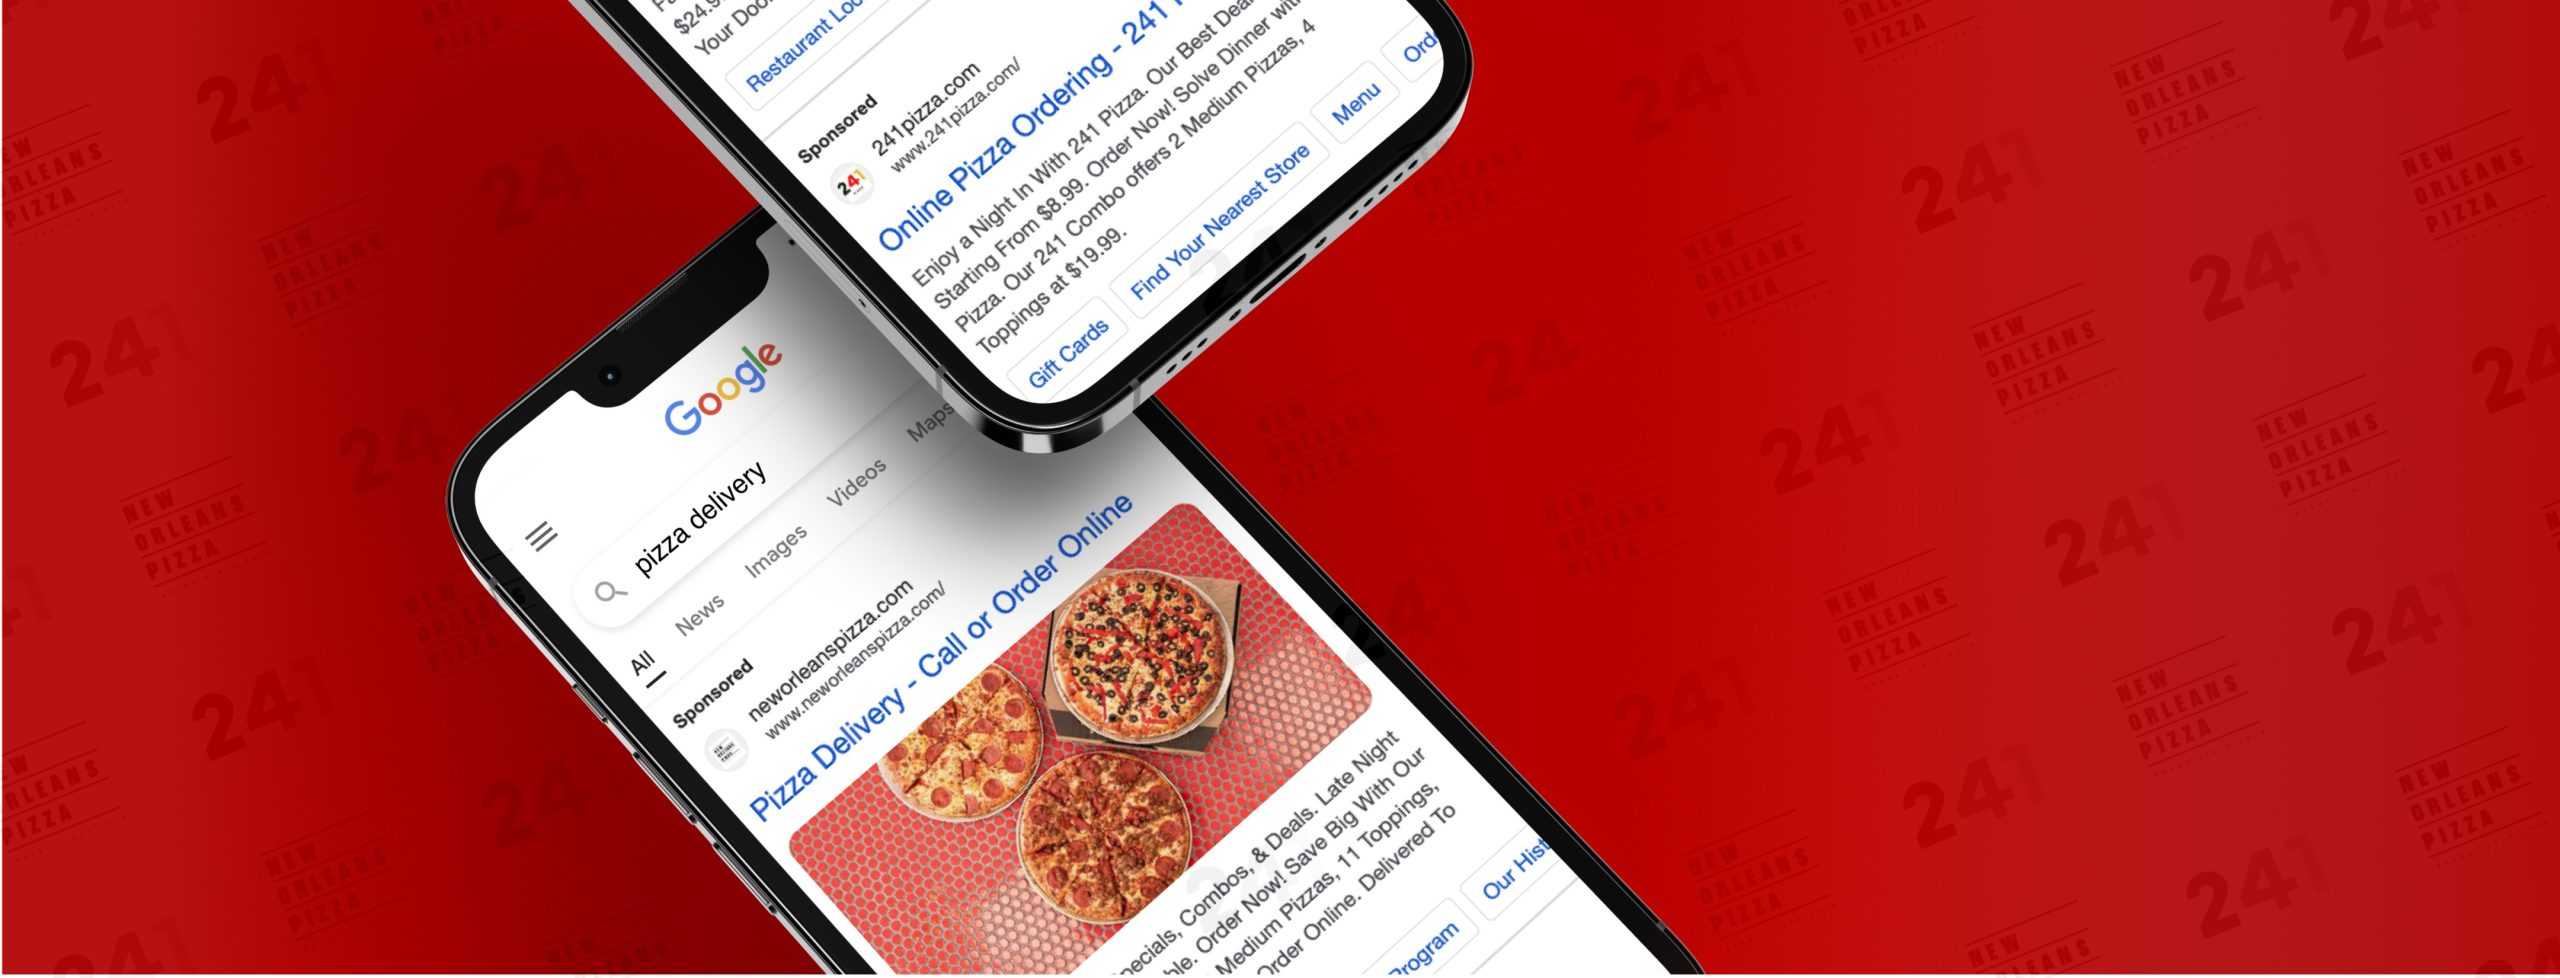 two phones googling pizza delivery and displaying the New Orleans Pizza ad on a red background